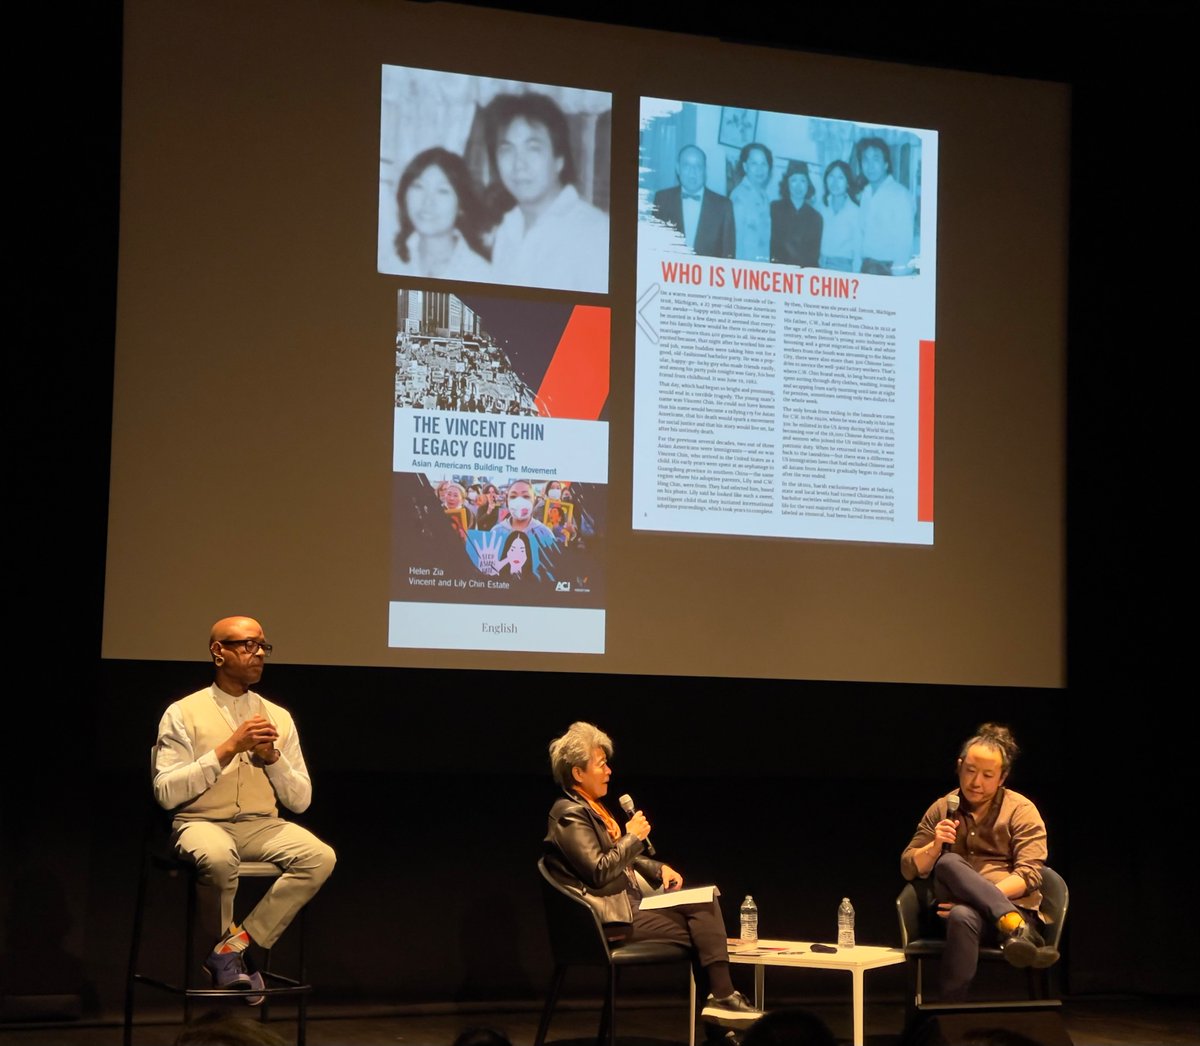 Jarod Lew talked with @HelenZiaReal @CAAM @sfmoma about learning his mother was Vincent Chin’s fiancé artforum.com/slant/jarod-le… & the @vincentchinlgcy guide she wrote  vincentchin.org
  
 #CAAMFest #sfmoma #caamfest2023 #RememberingVincentChin #VincentChin